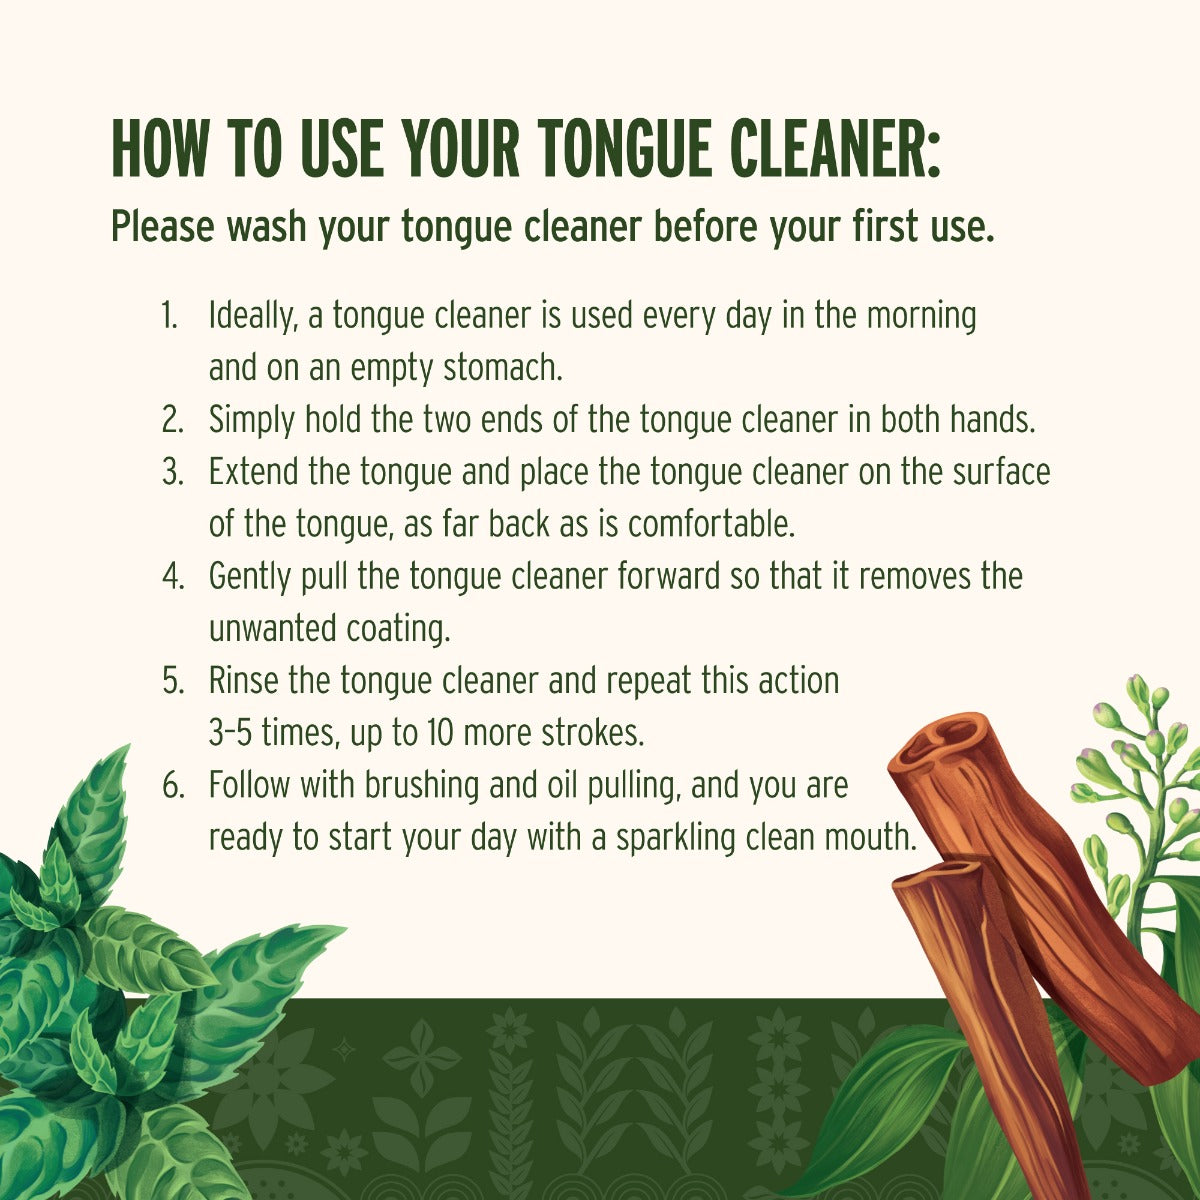 How to use your tongue cleaner